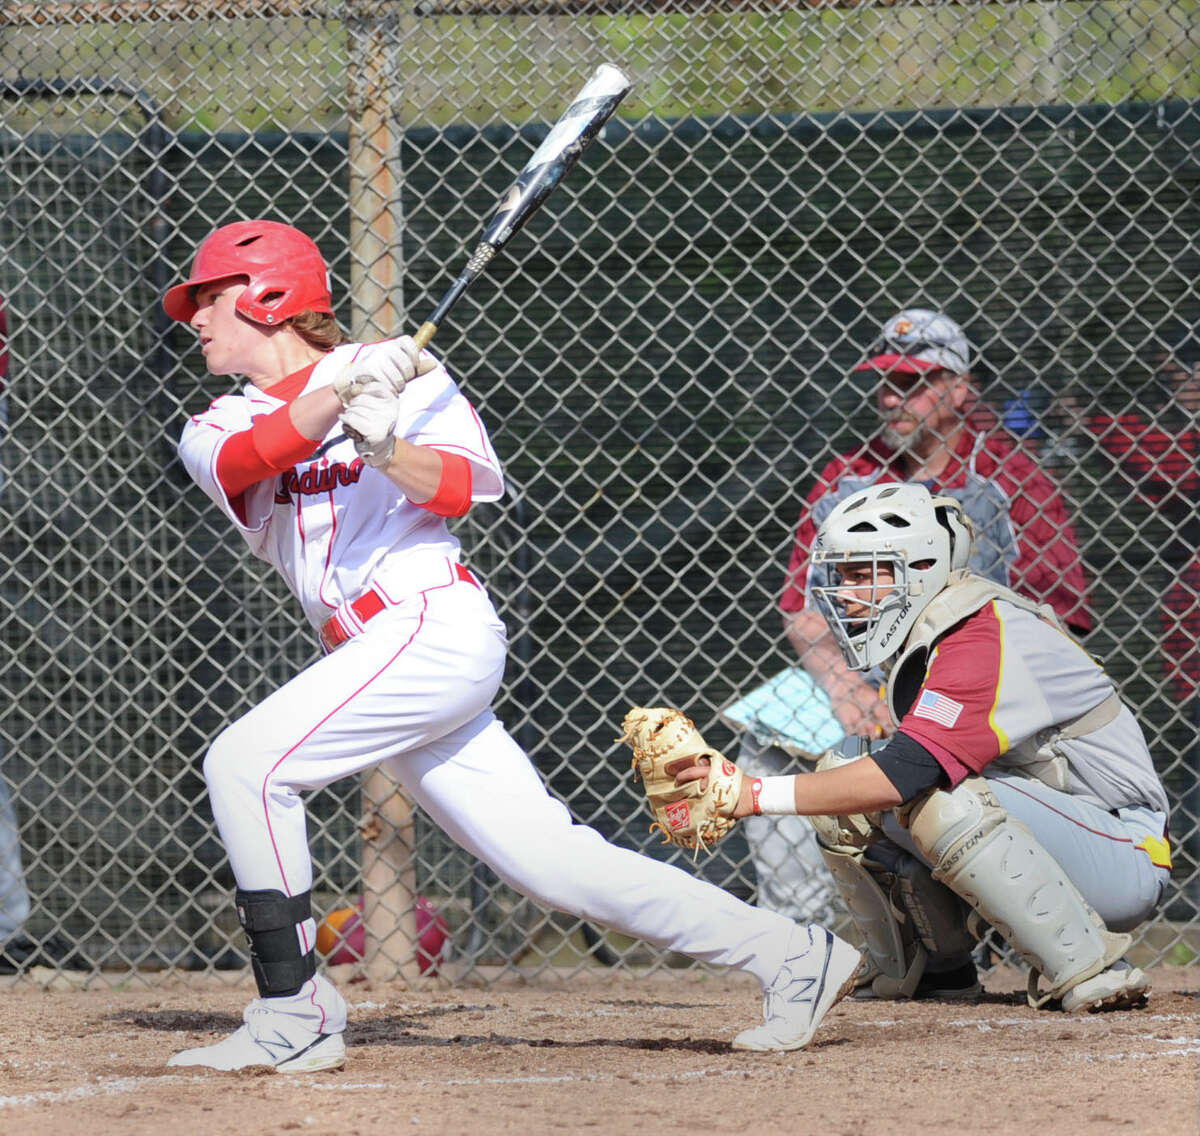 Kyle Dunster of Greenwich hits during the high school baseball game between Greenwich High School and St. Joseph High School at Greenwich, Friday, May 2, 2014. Greenwich won 5-4 on a game winning double by Dunster in the bottom of the 7th inning.